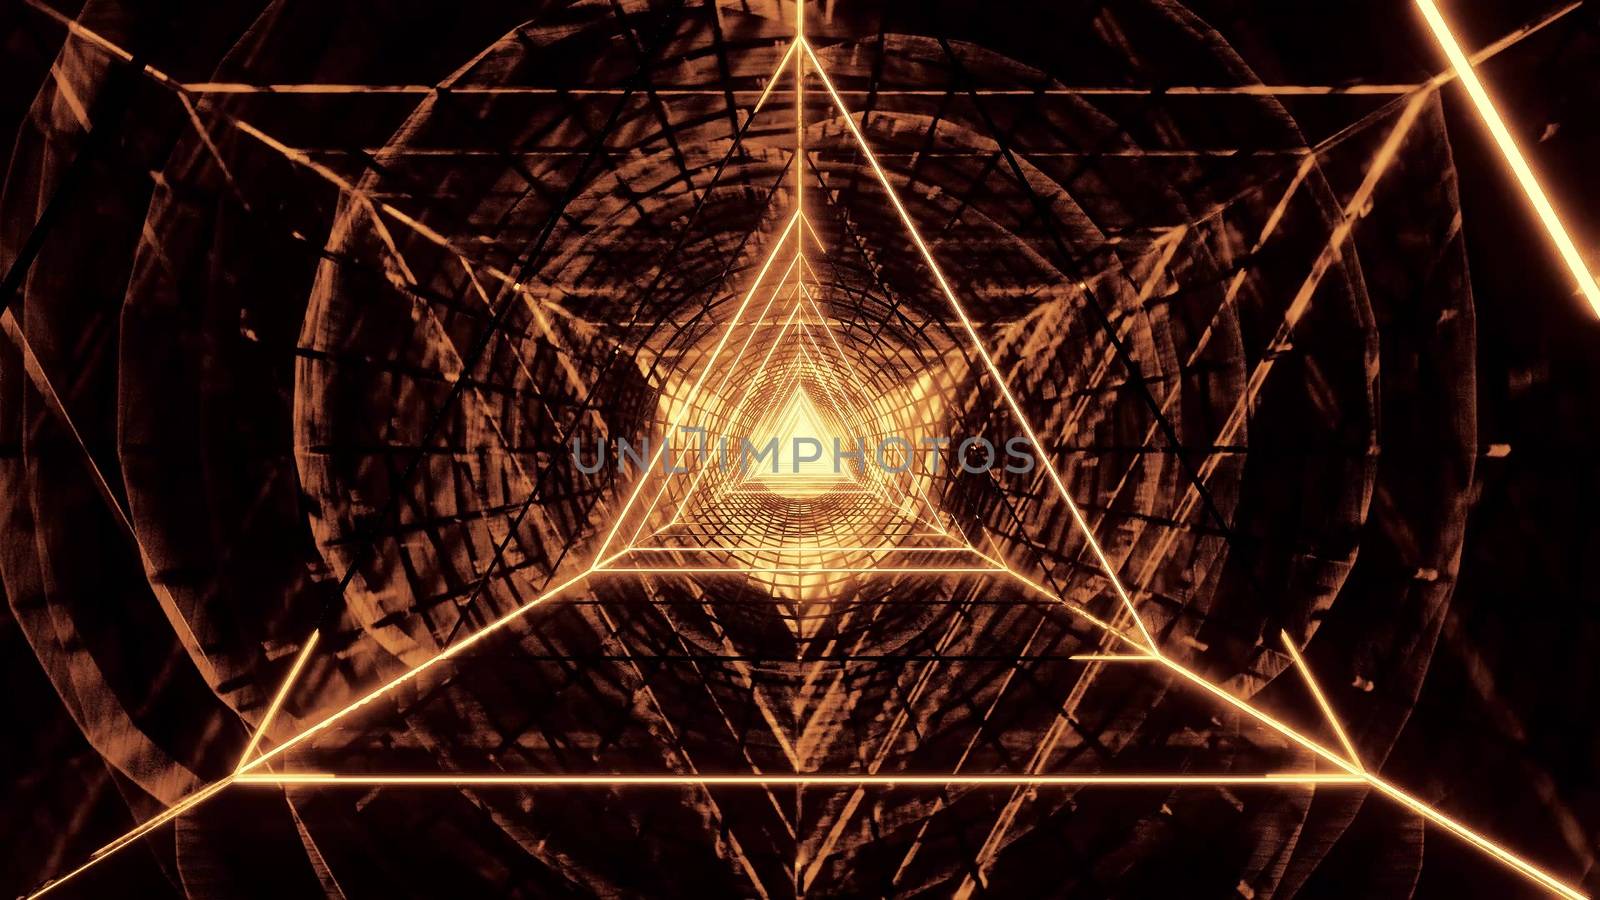 abstract glowig wireframe triangle design with dark abstract background 3d illustration wallpaper, abstract dark 3d rendering art